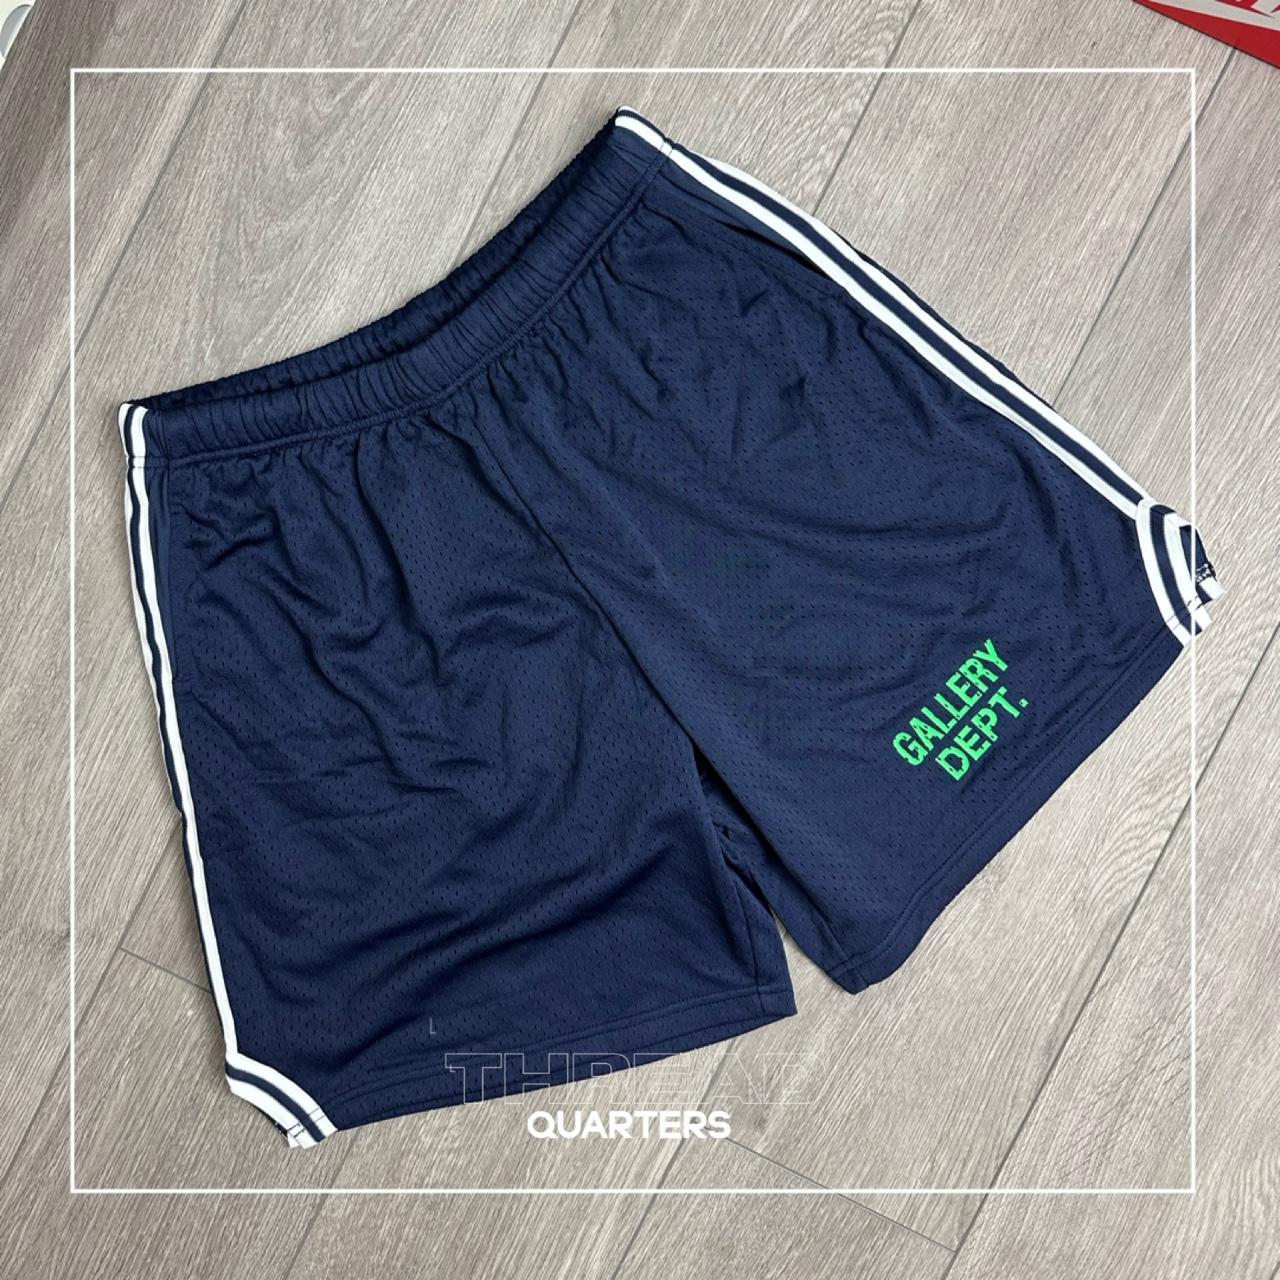 Gallery Dept. Shorts for Sale in Louisville, KY - OfferUp